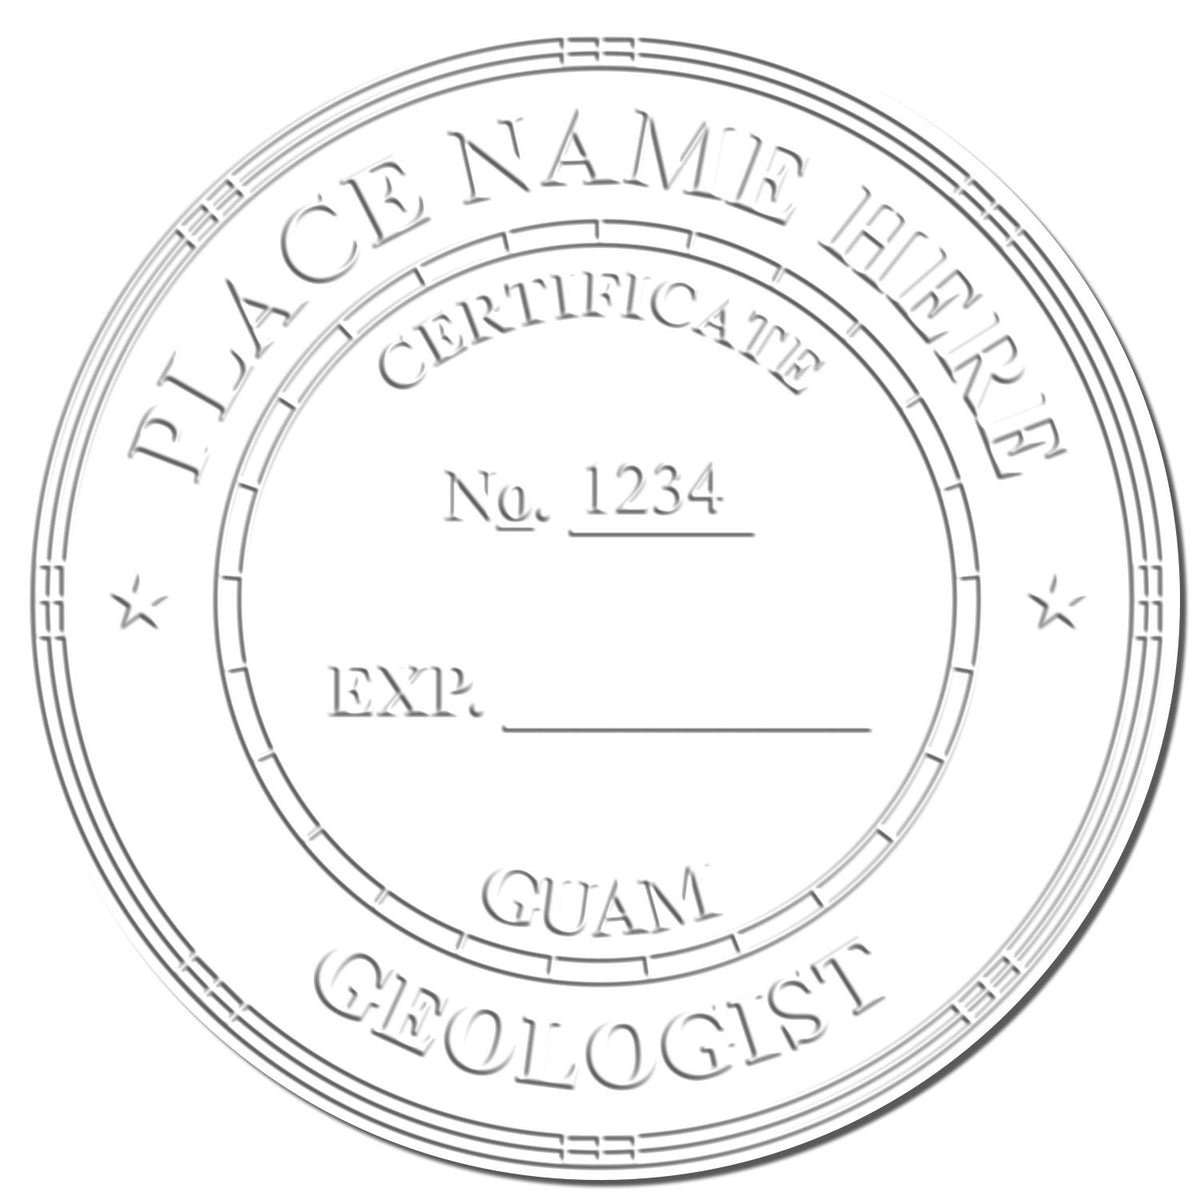 A photograph of the Hybrid Guam Geologist Seal stamp impression reveals a vivid, professional image of the on paper.